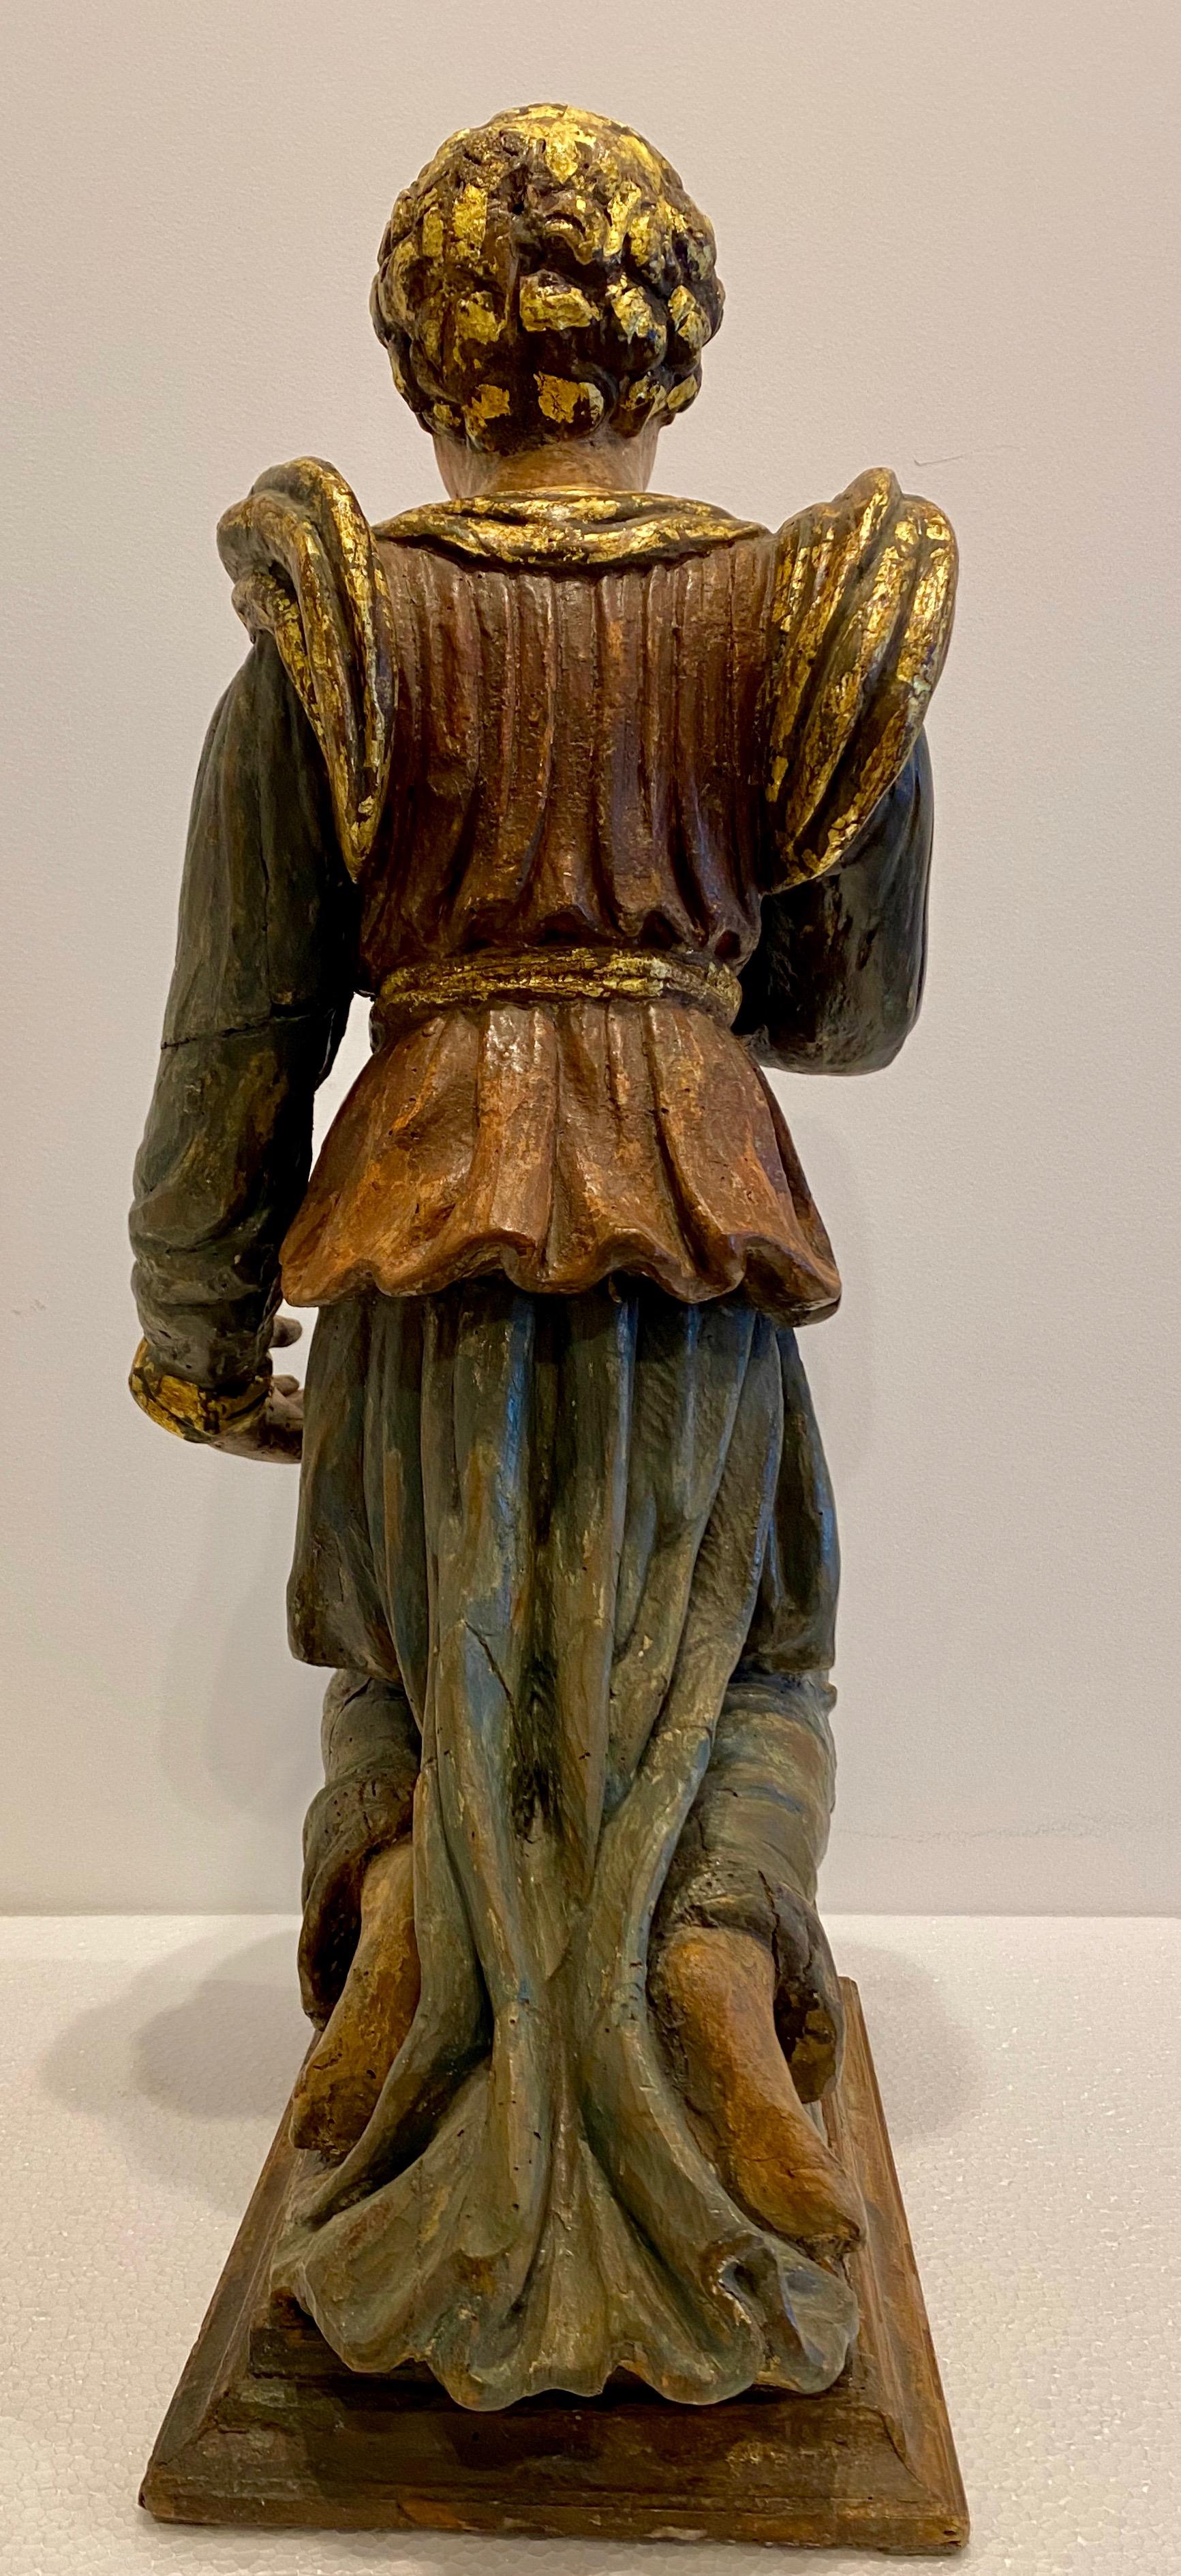 Italian Painted and Lacquered Wooden Sculpture of a Kneeling Figure, Circa 1650 For Sale 3